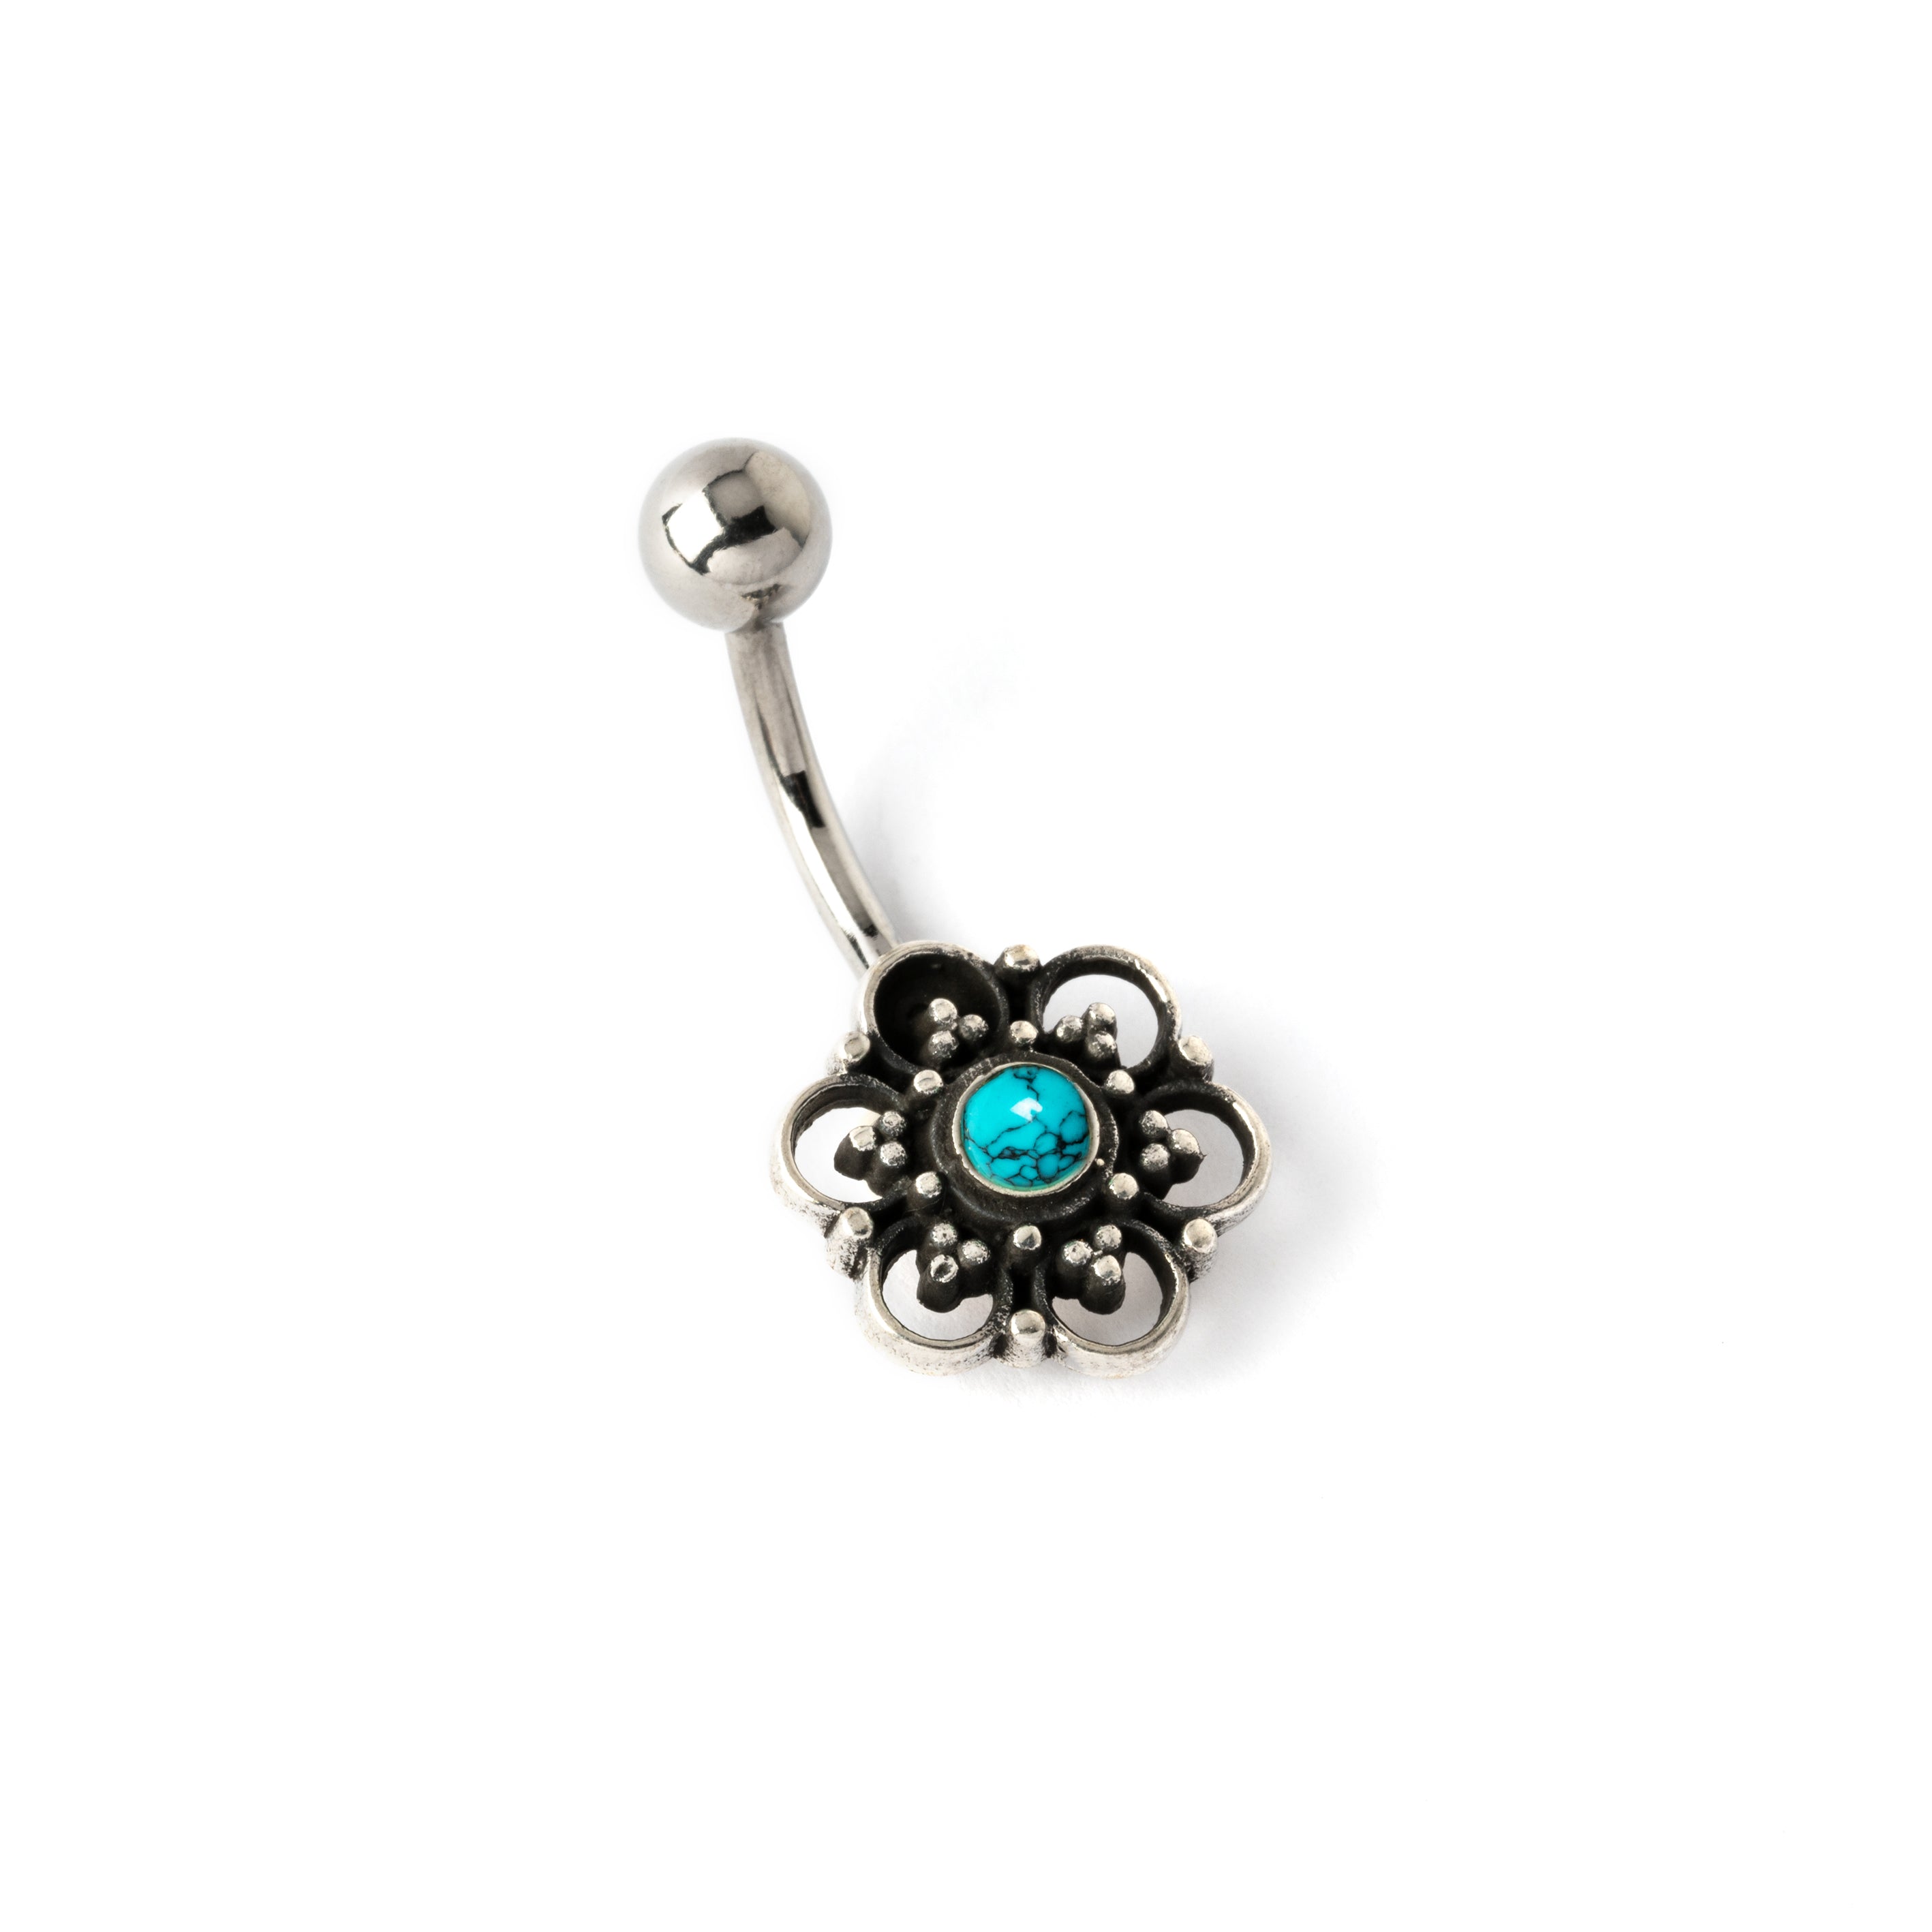 Silver Flower Belly Piercing on a surgical steel bar with centred turquoise stone left side view